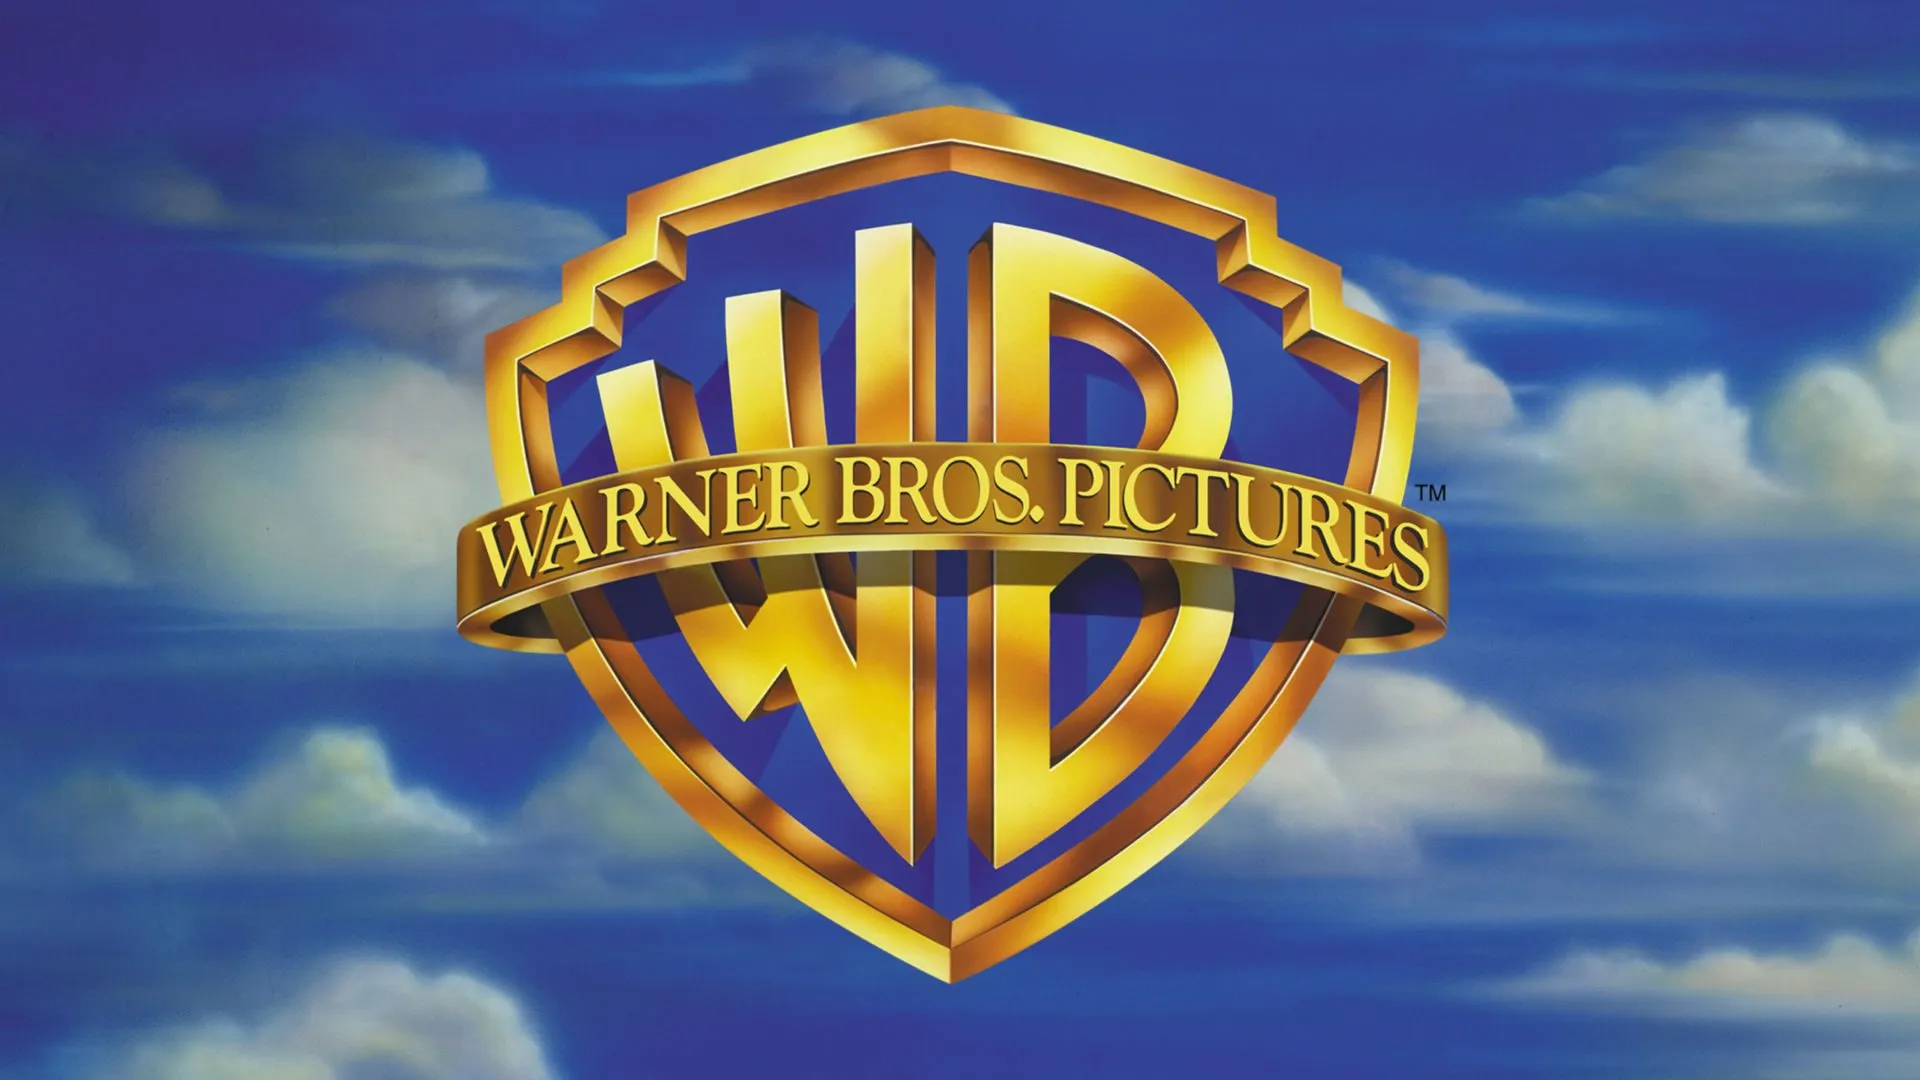 Warner Bros Reveals New Footage Of All The Upcoming 2022 DC Films